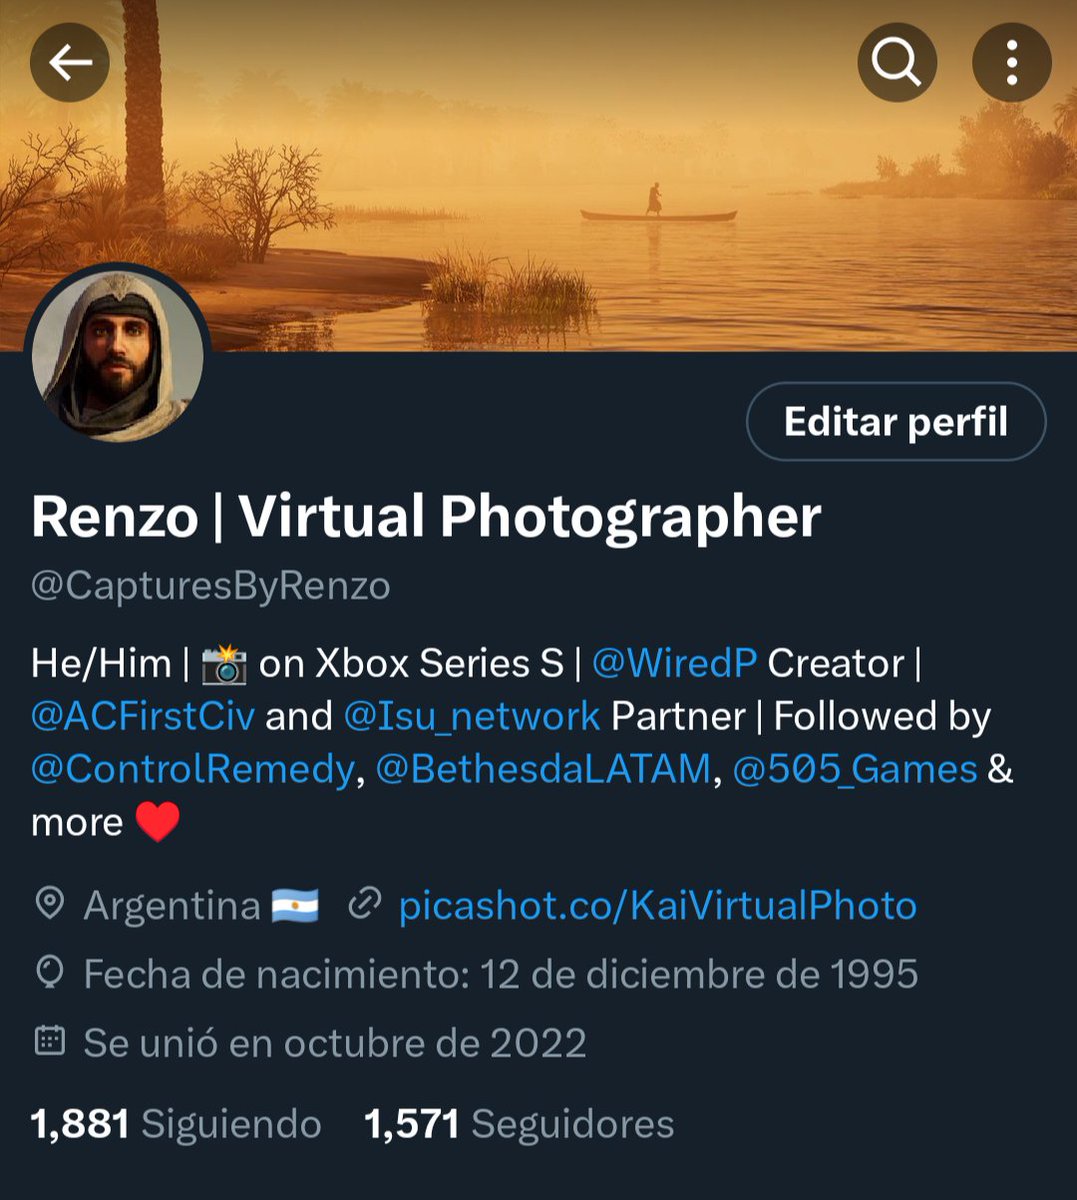 Brief announcement 📣 (reposts are appreciated) I decided to implement some changes on my account, mainly a new display name and handle (@CapturesByRenzo). I wanted to do this for a while, since I now feel more comfortable with using my IRL name on social media ☺️ (1/2)